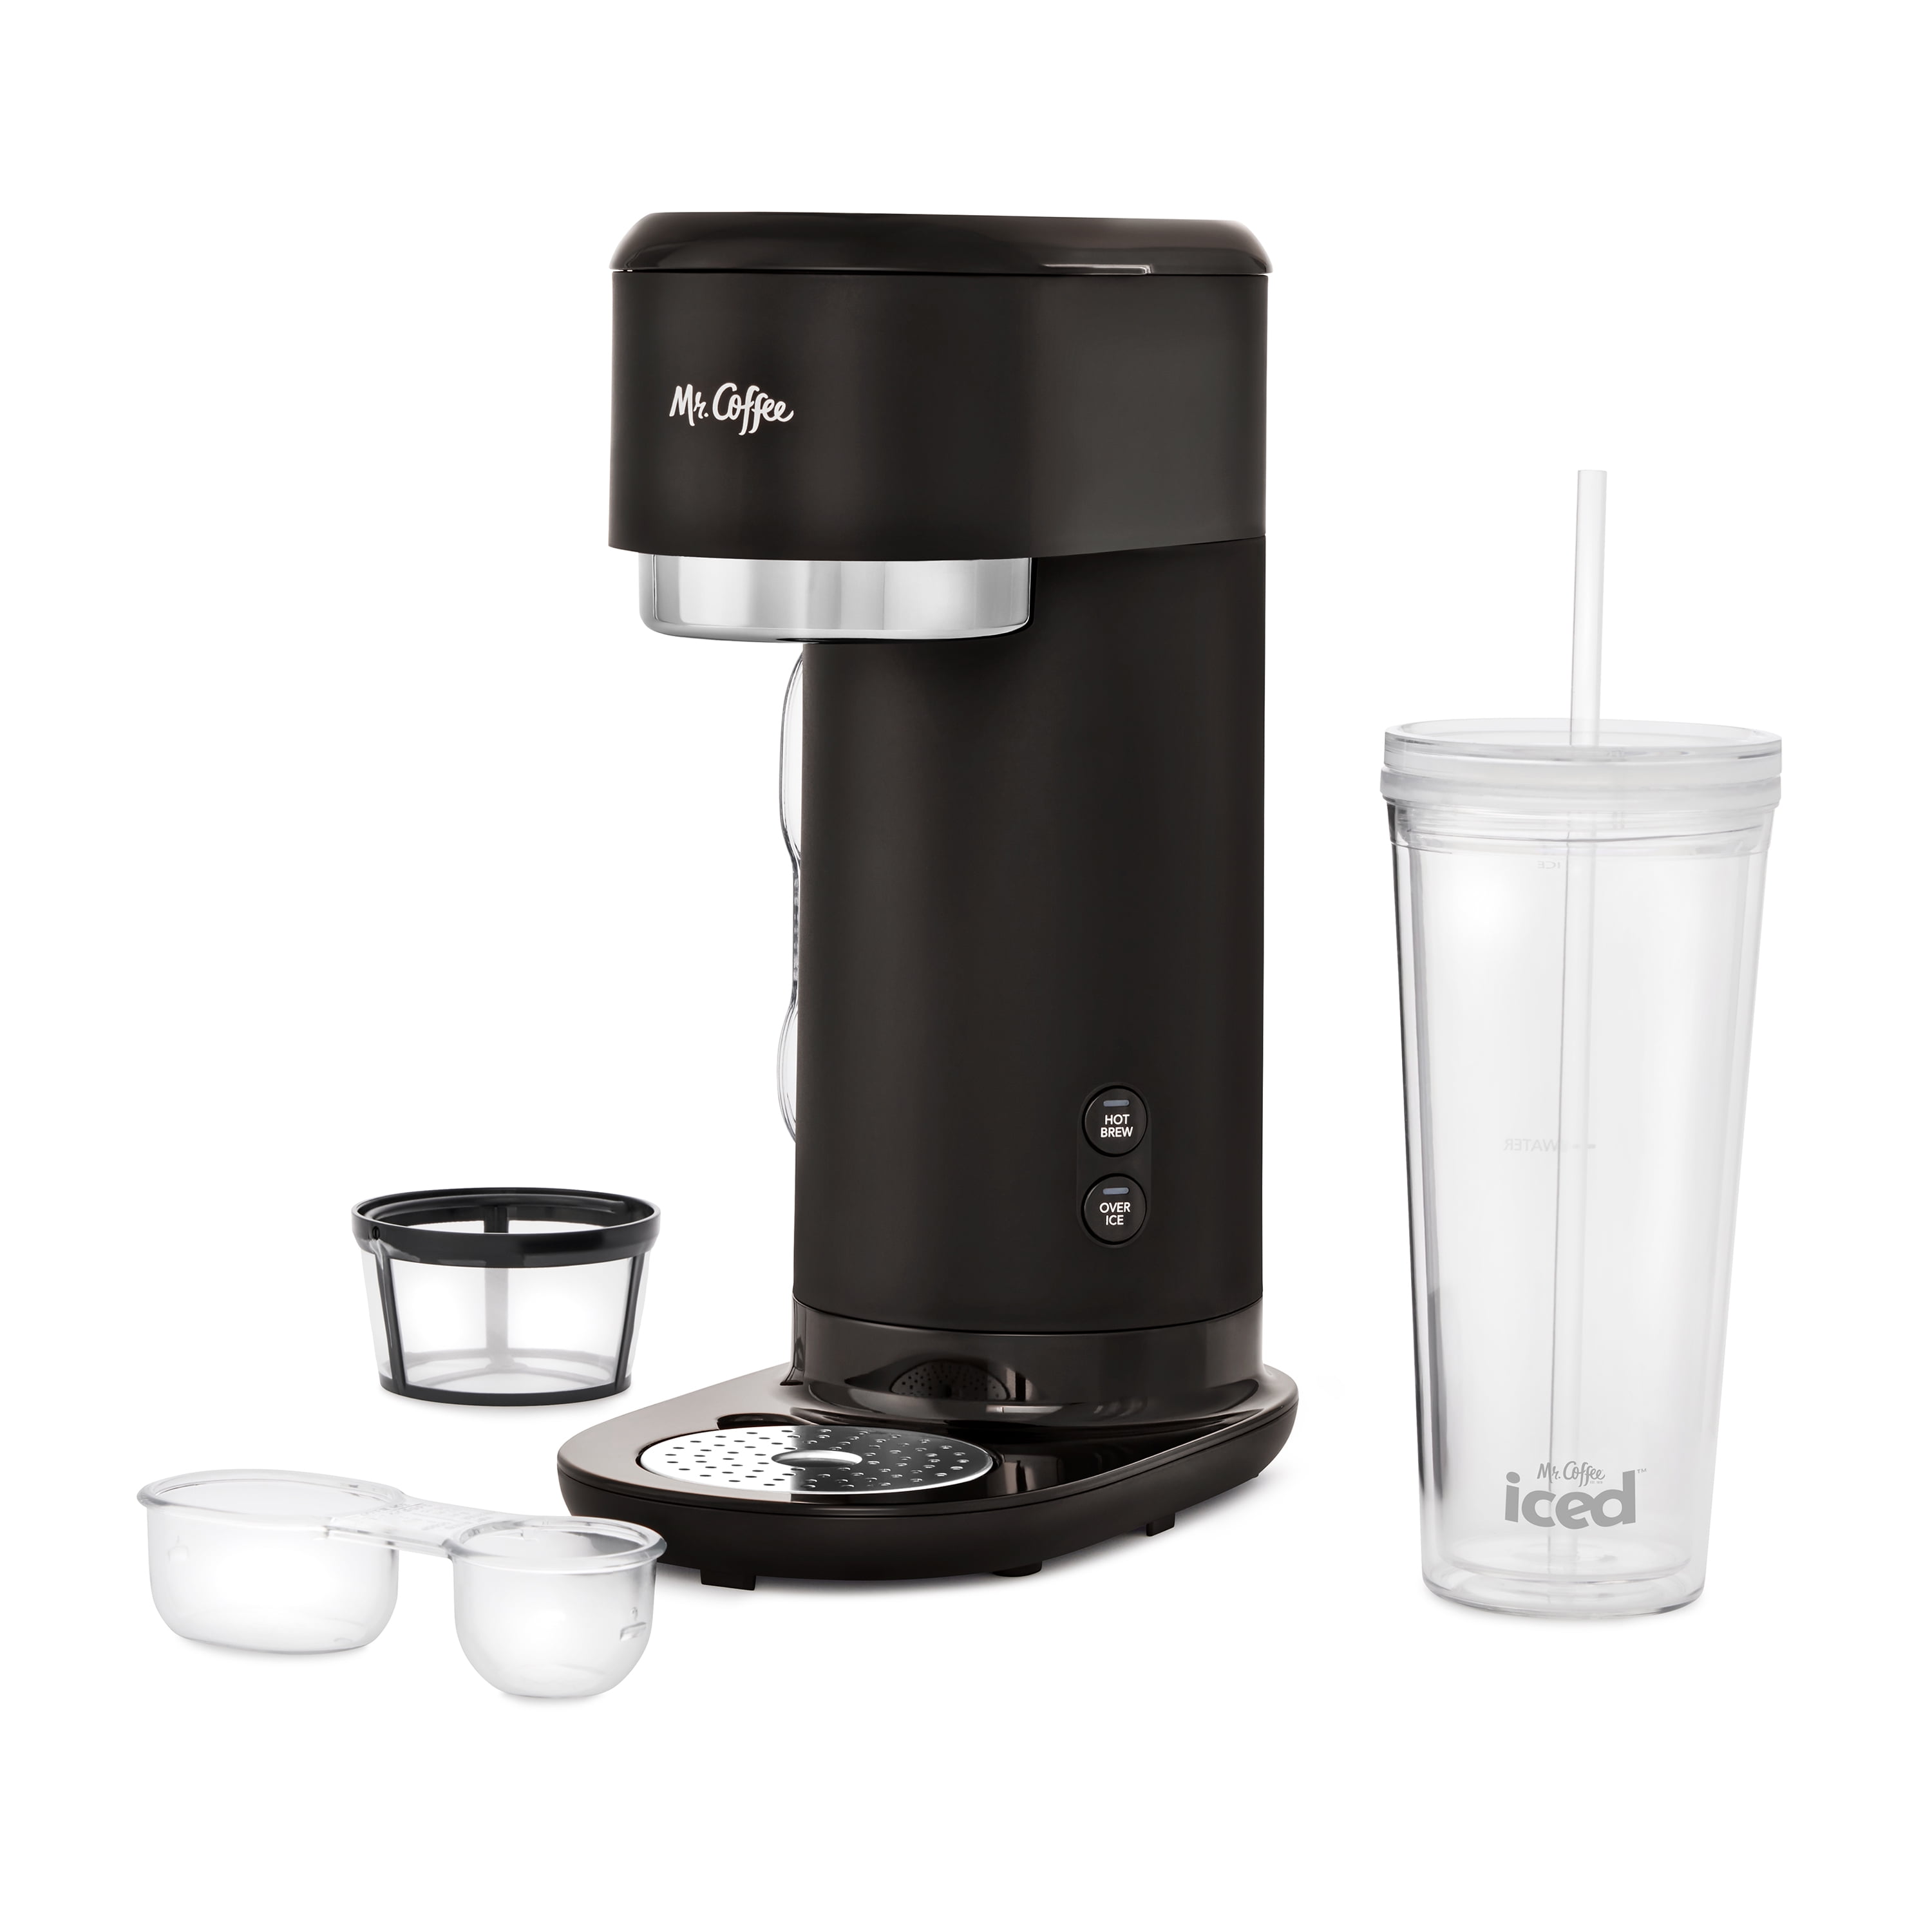  Mr. Coffee Iced Coffee Maker, Single Serve Machine with  22-Ounce Tumbler and Reusable Coffee Filter, Black: Home & Kitchen